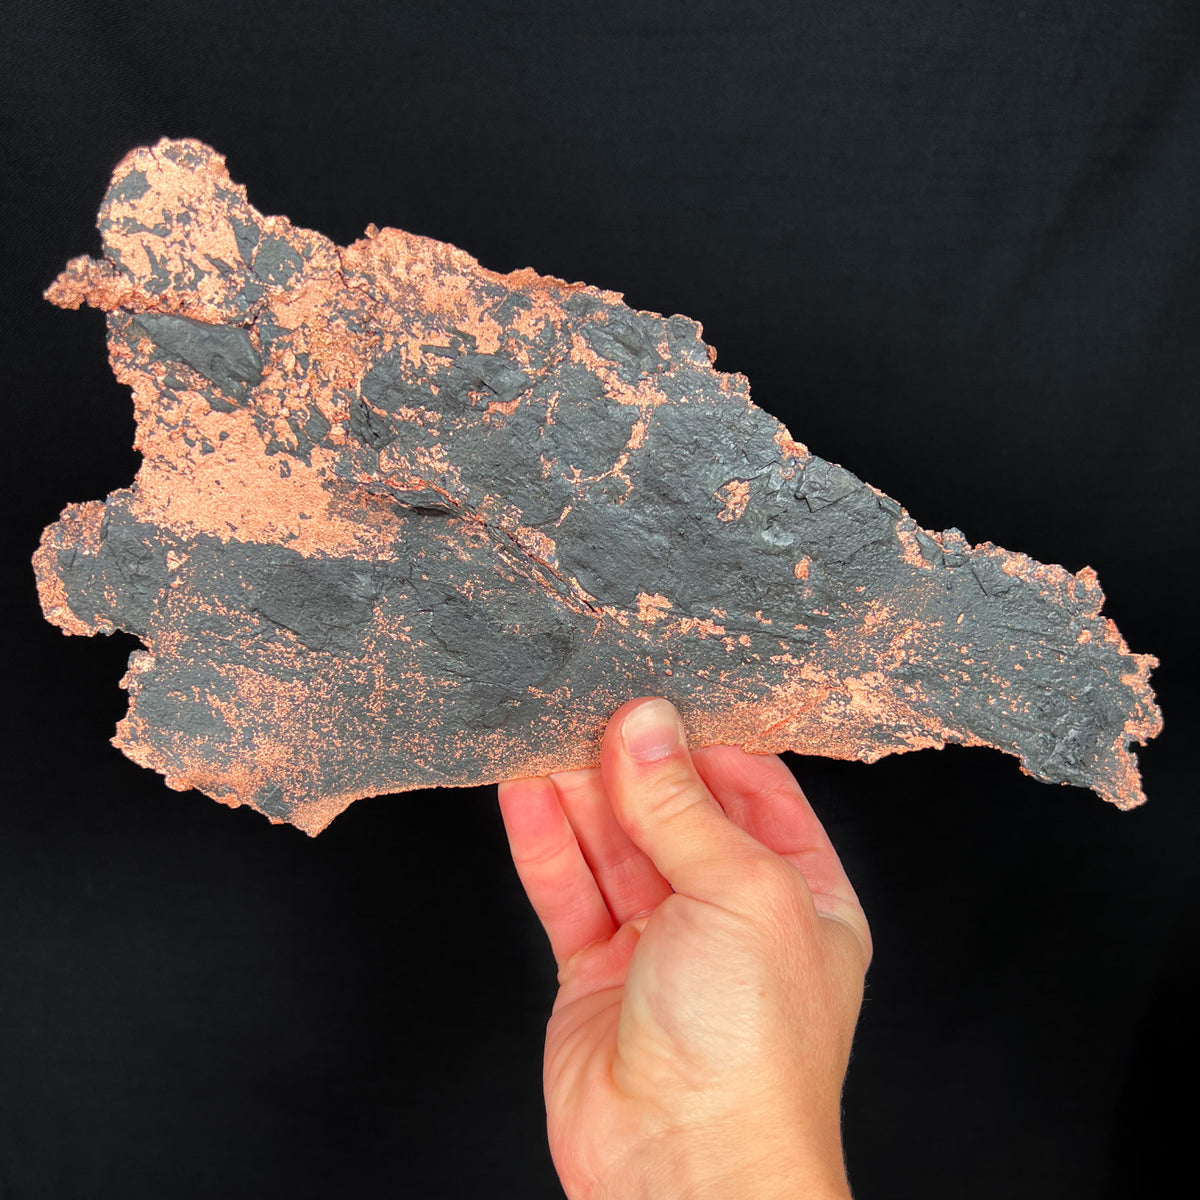 Native Sheet Copper with Shale from White Pine Mine, Michigan